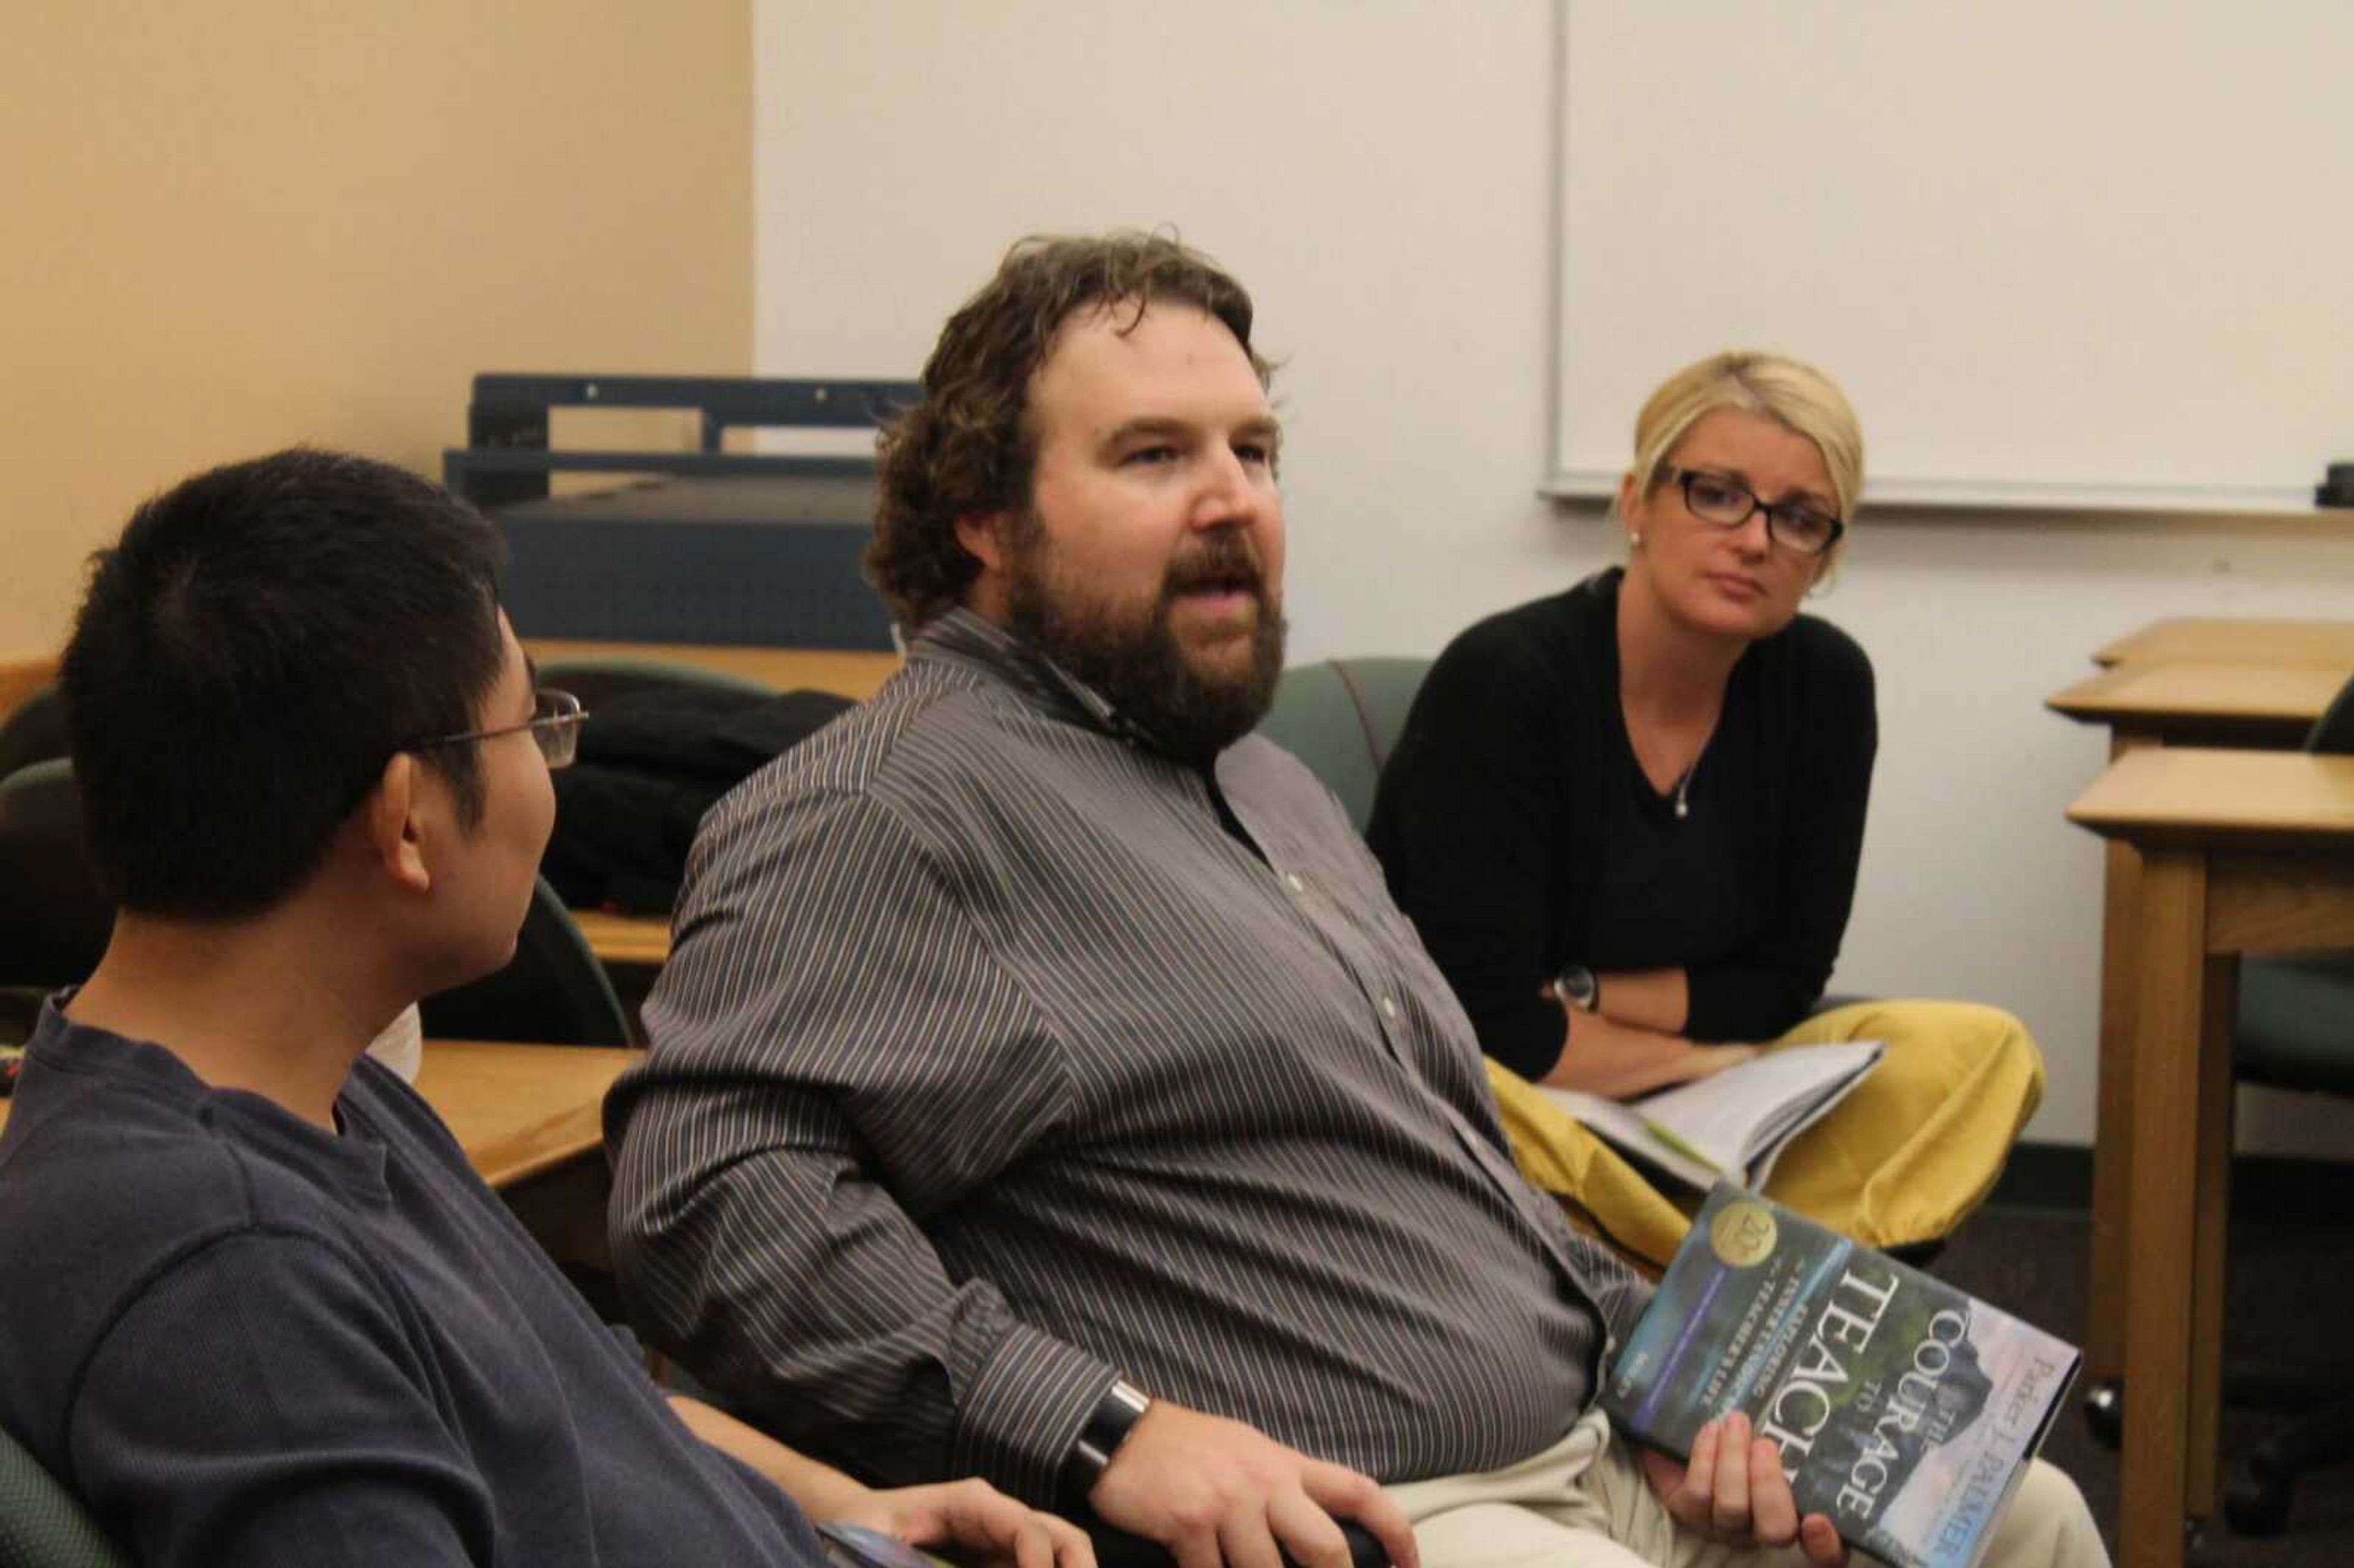 Book studies aim to aid in faculty development